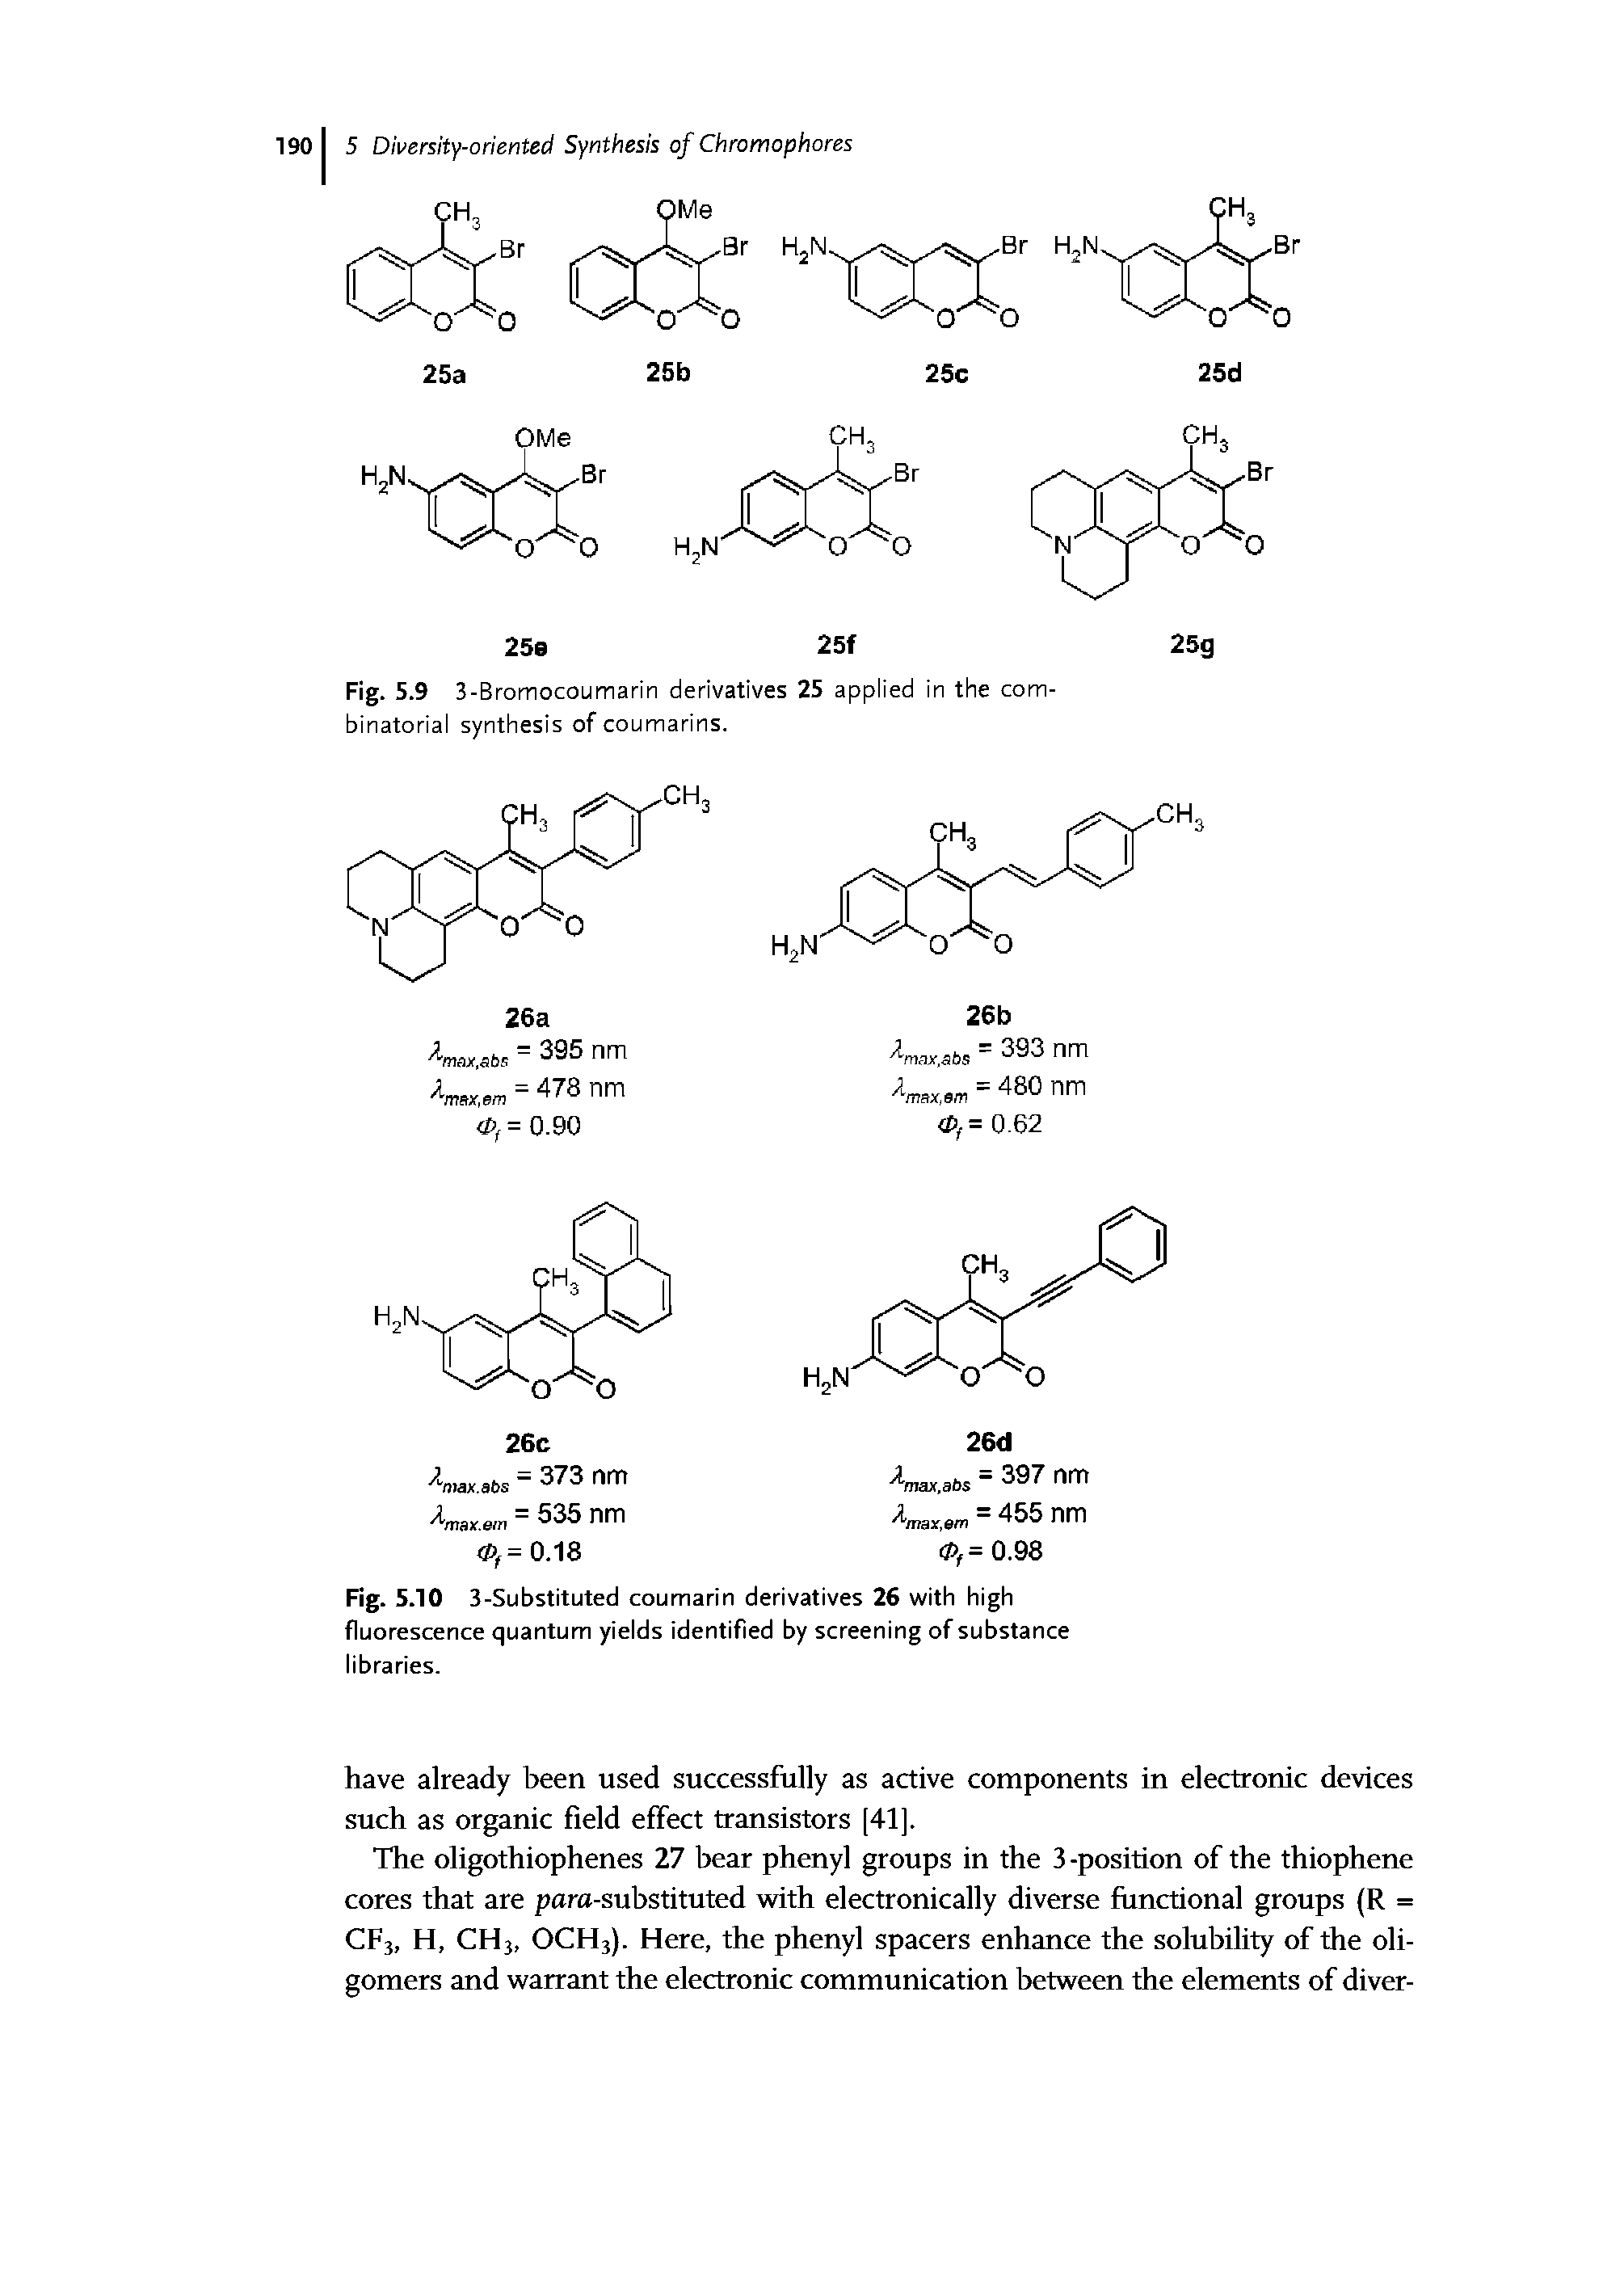 Fig. 5.10 3-Substituted coumarin derivatives 26 with high fluorescence quantum yields identified by screening of substance libraries.